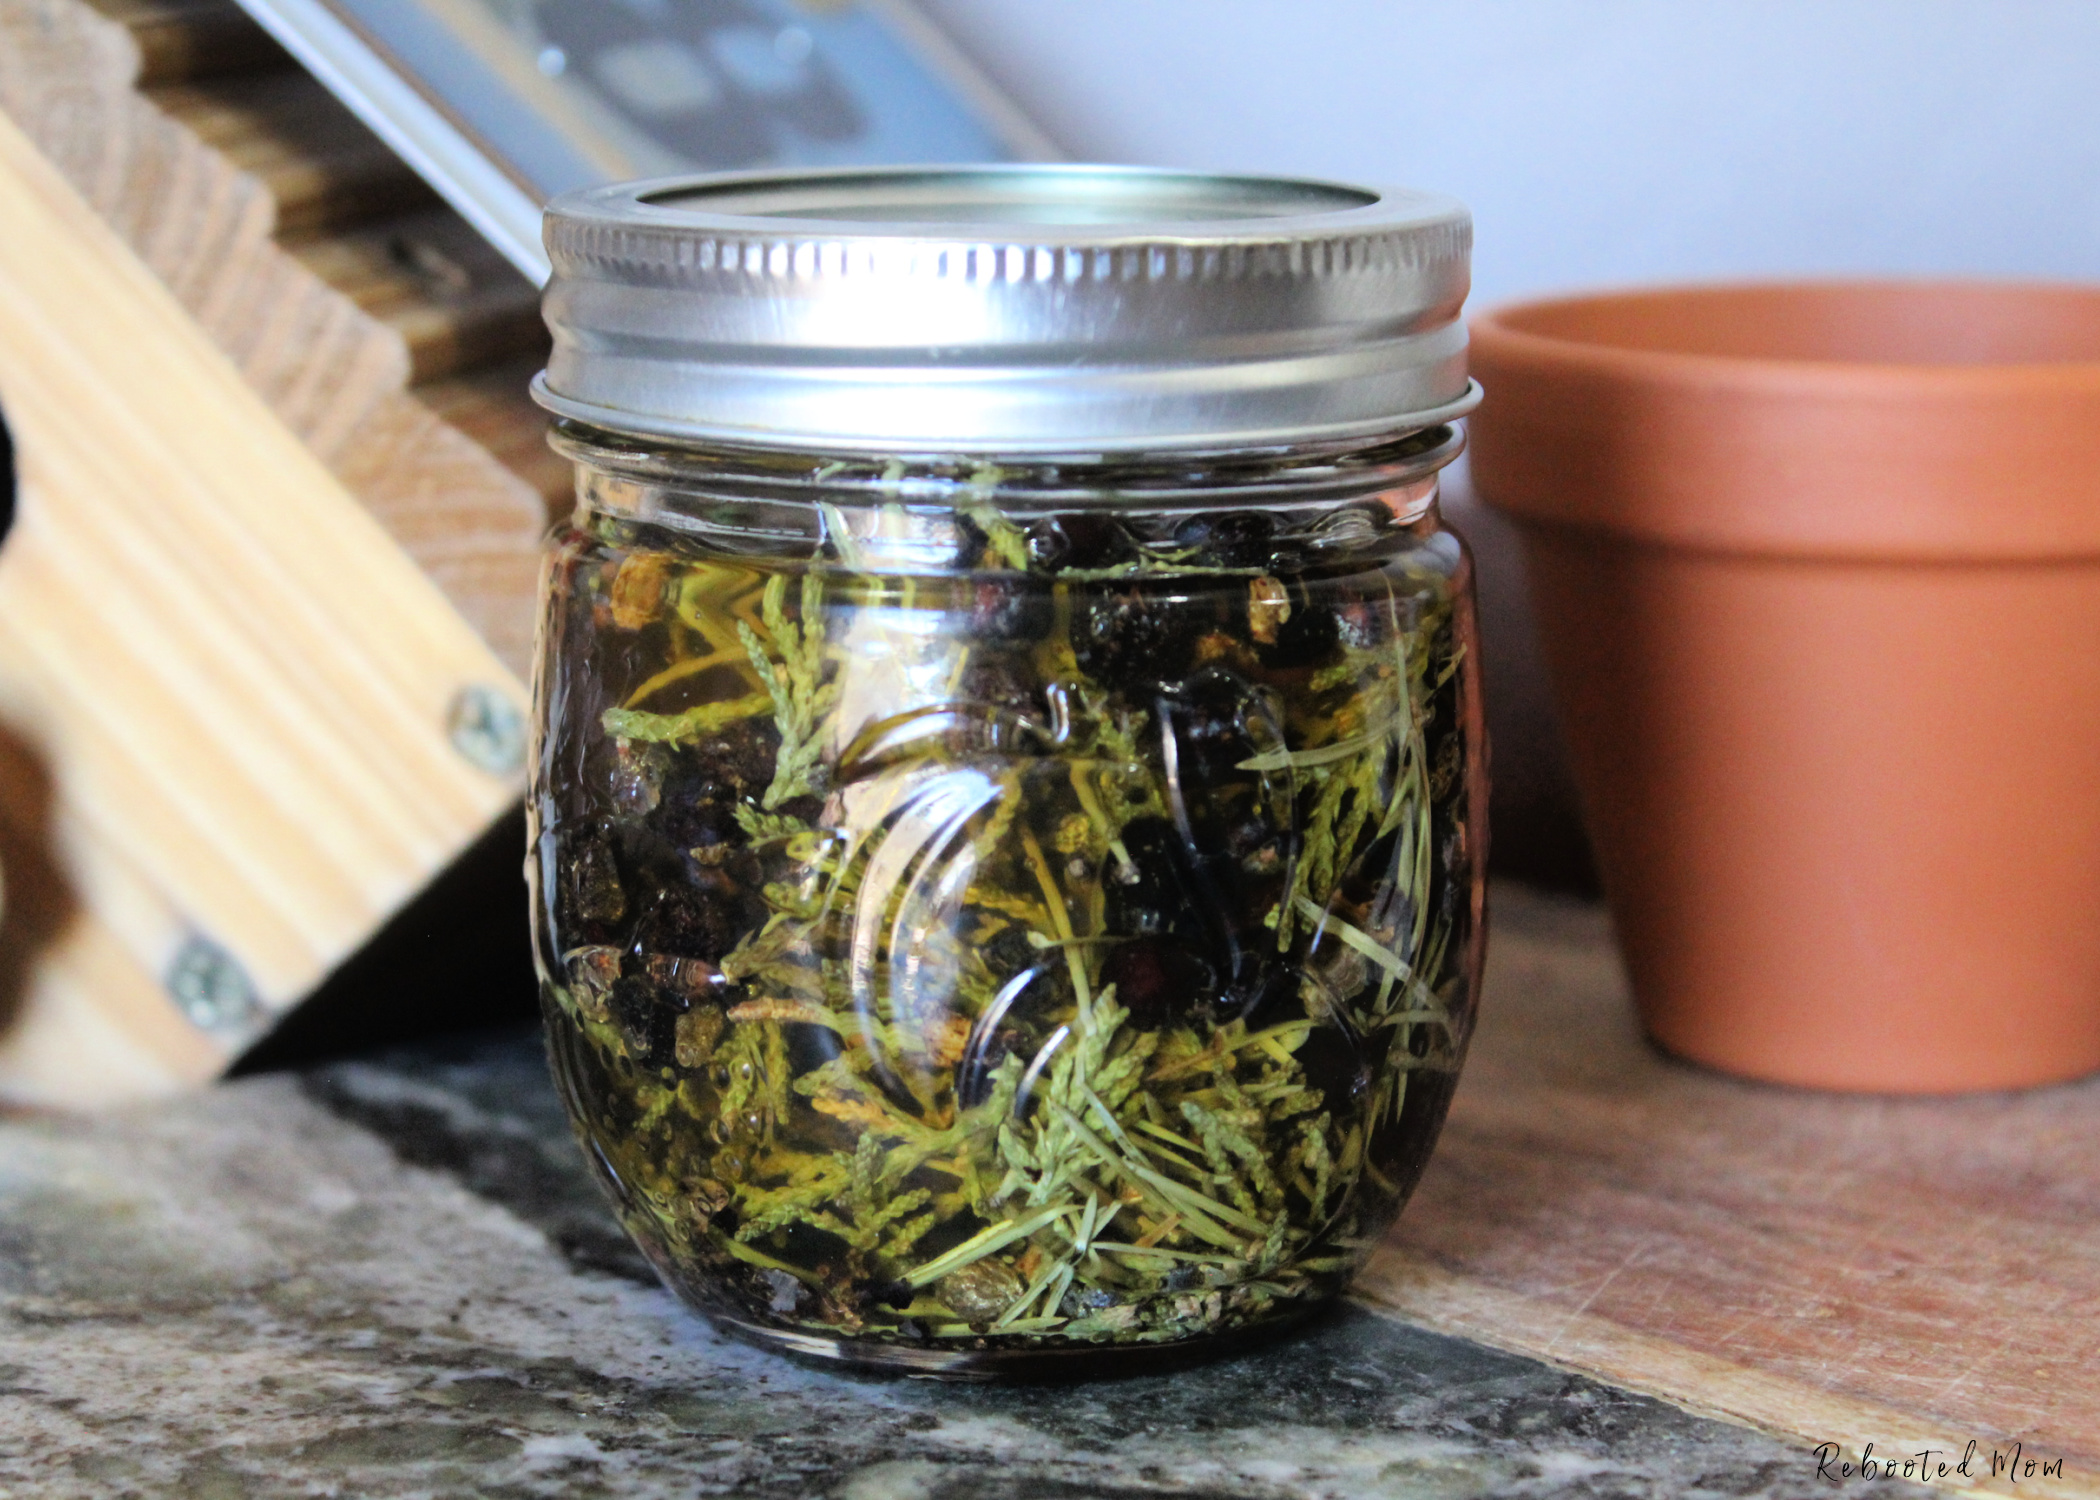 Learn how to make Juniper-Infused Honey - a wonderful addition to tea or bread with it's citrus spicy aroma and flavor.